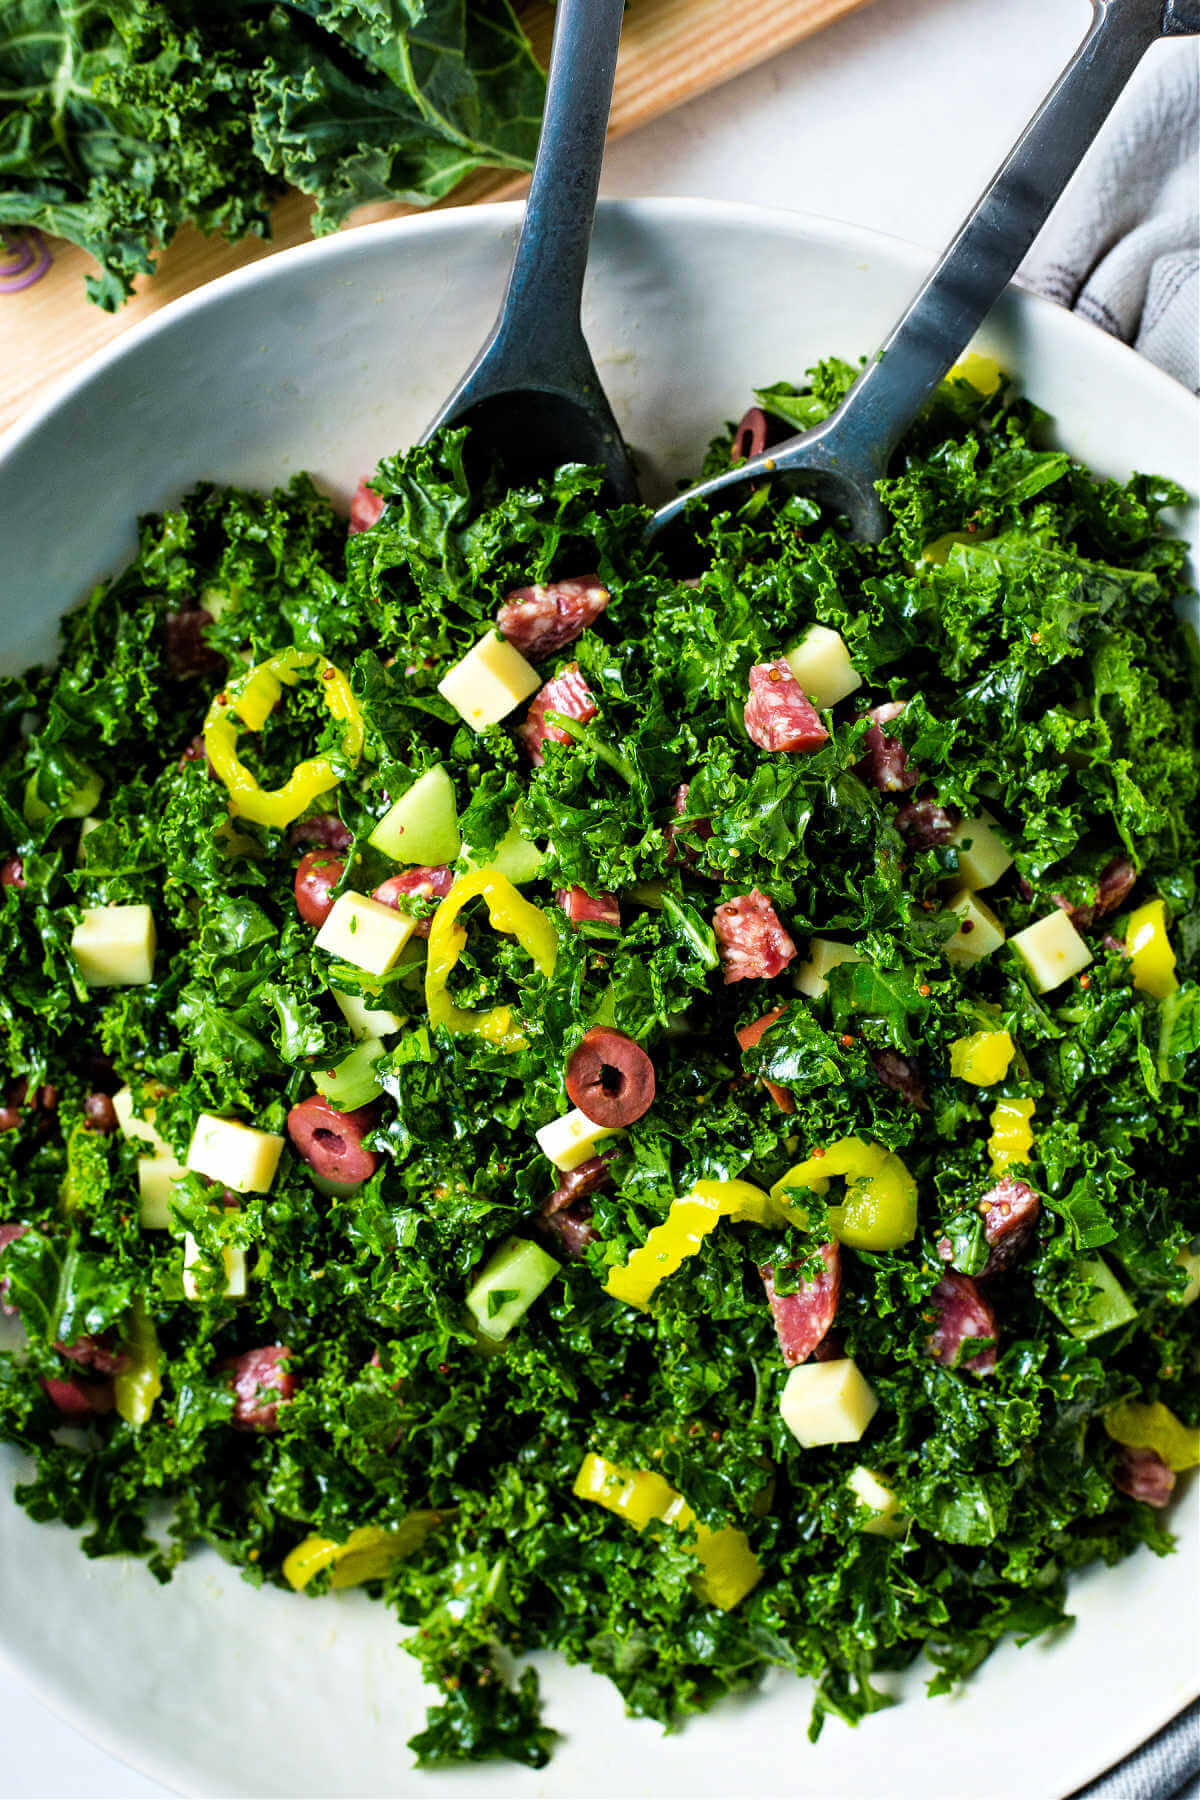 tossing the vinaigrette and other ingredients together for a chopped kale salad.